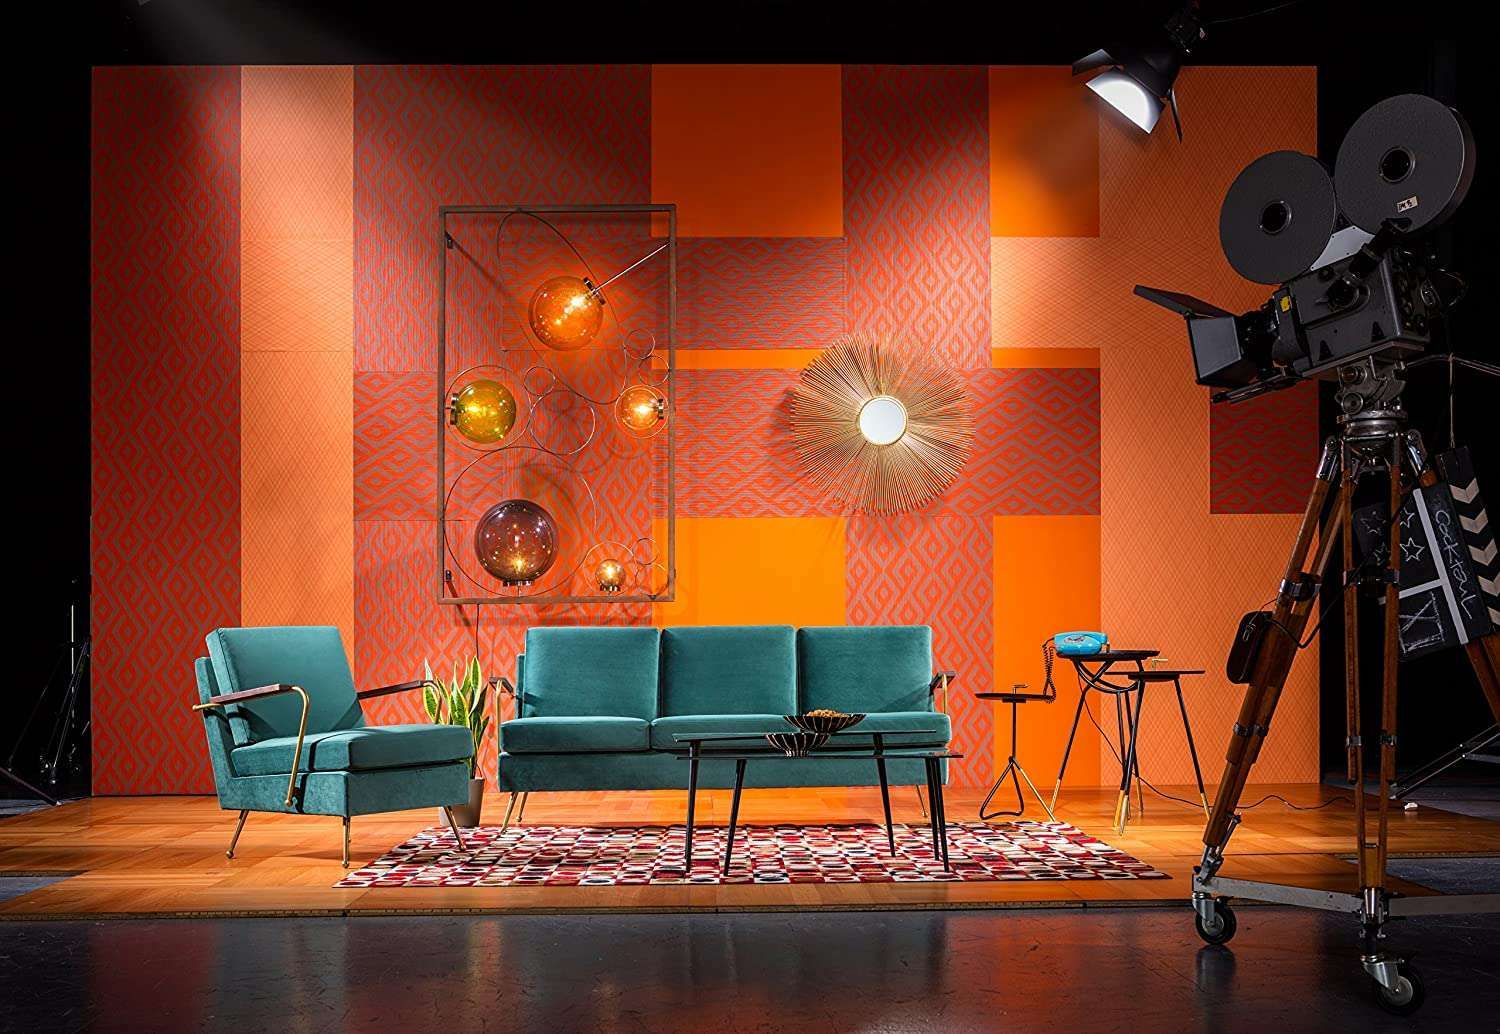 Mirrors Press profile homify 现代客厅設計點子、靈感 & 圖片 Furniture, Couch, Stage is empty, Orange, Chair, Interior design, Entertainment, Tripod, Table, Performing arts